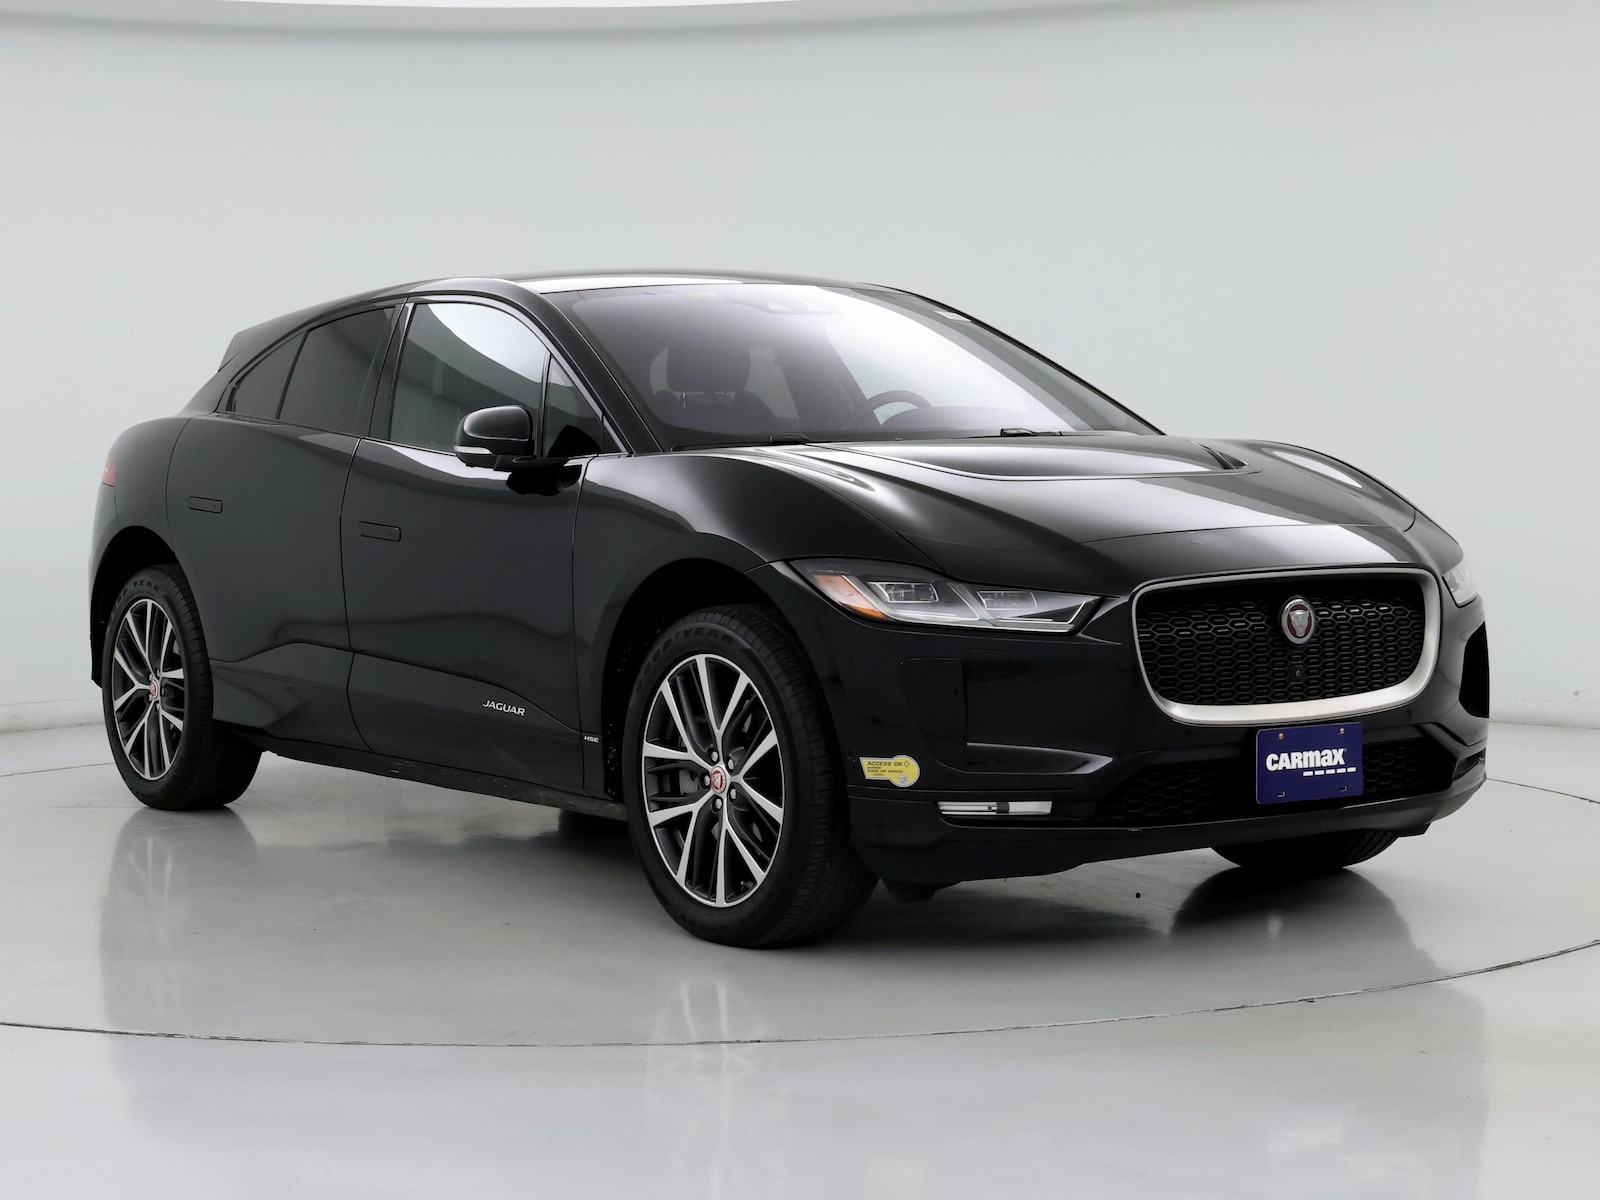 Used 2019 Jaguar I-PACE First Edition with VIN SADHD2S16K1F71800 for sale in Kenosha, WI